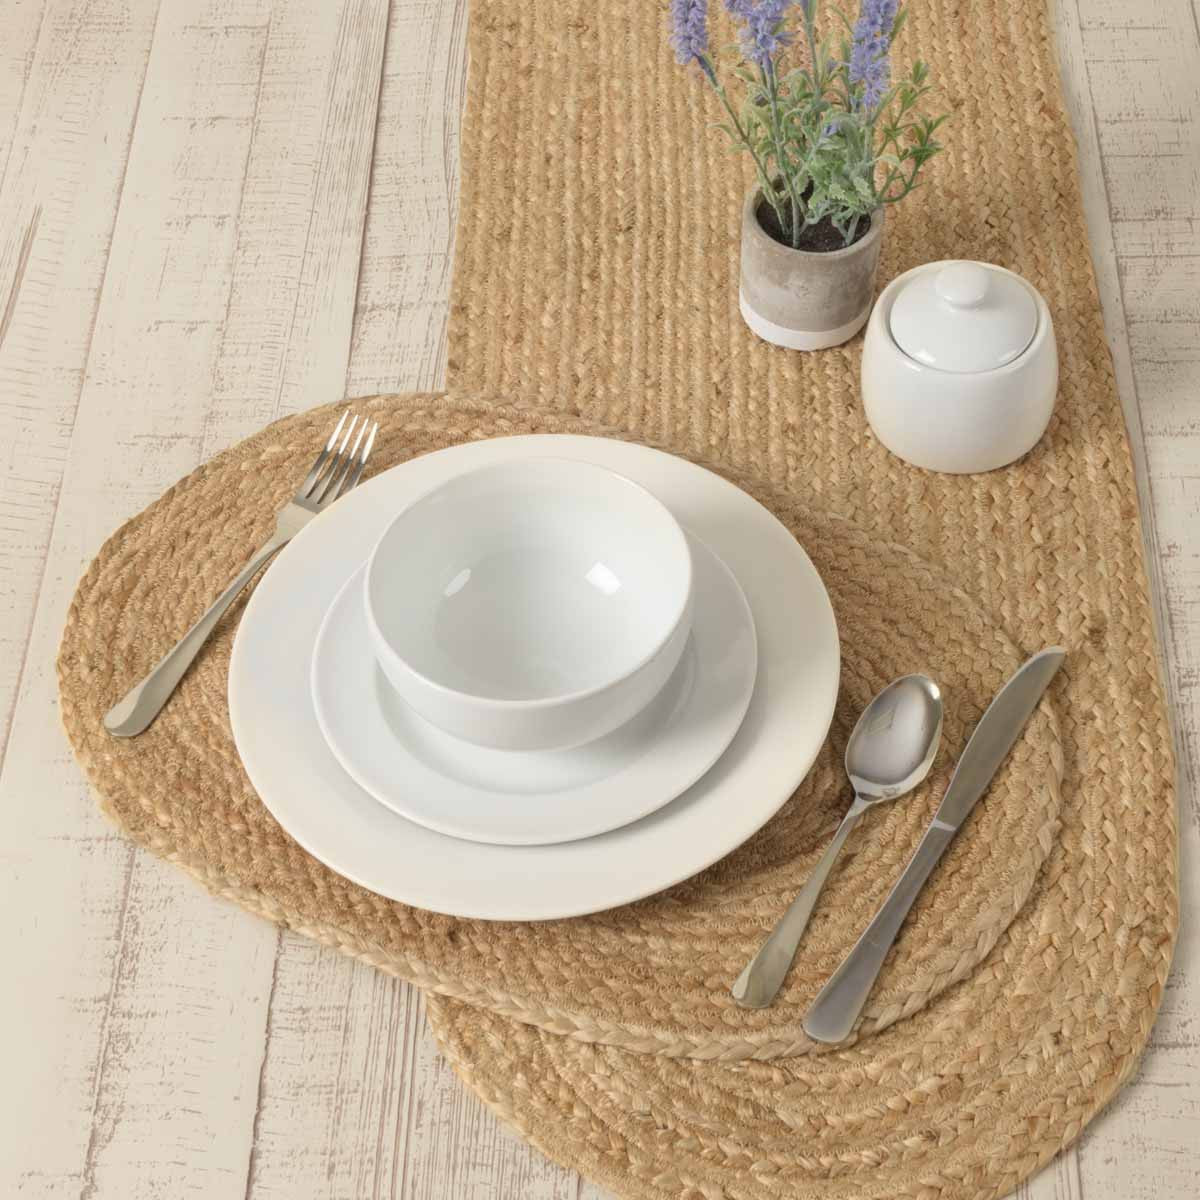 Natural Jute Braided Placemats Set of 6 - VHC Brands